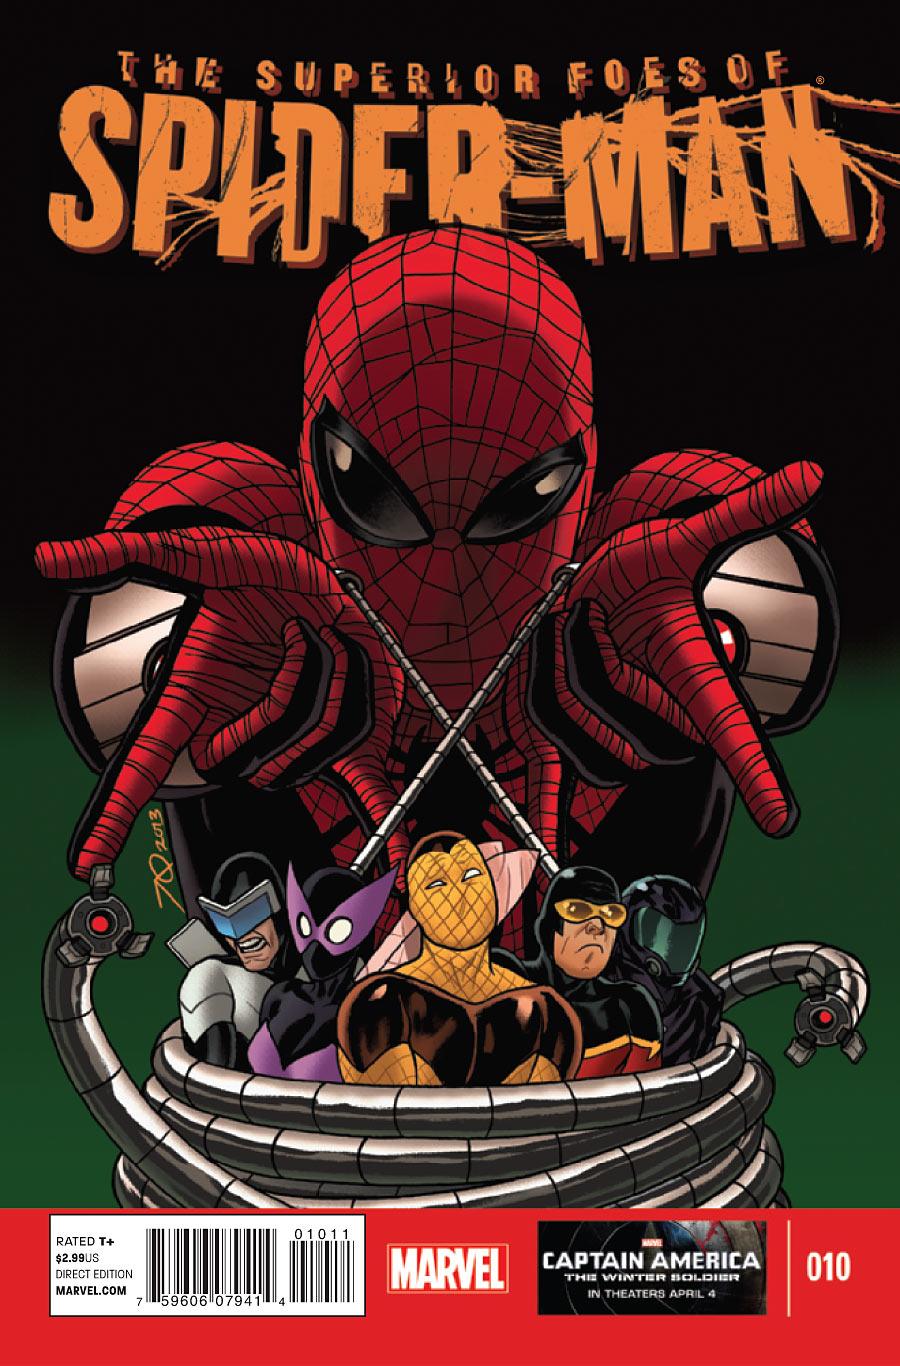 The Superior Foes of Spider-Man Vol. 1 #10